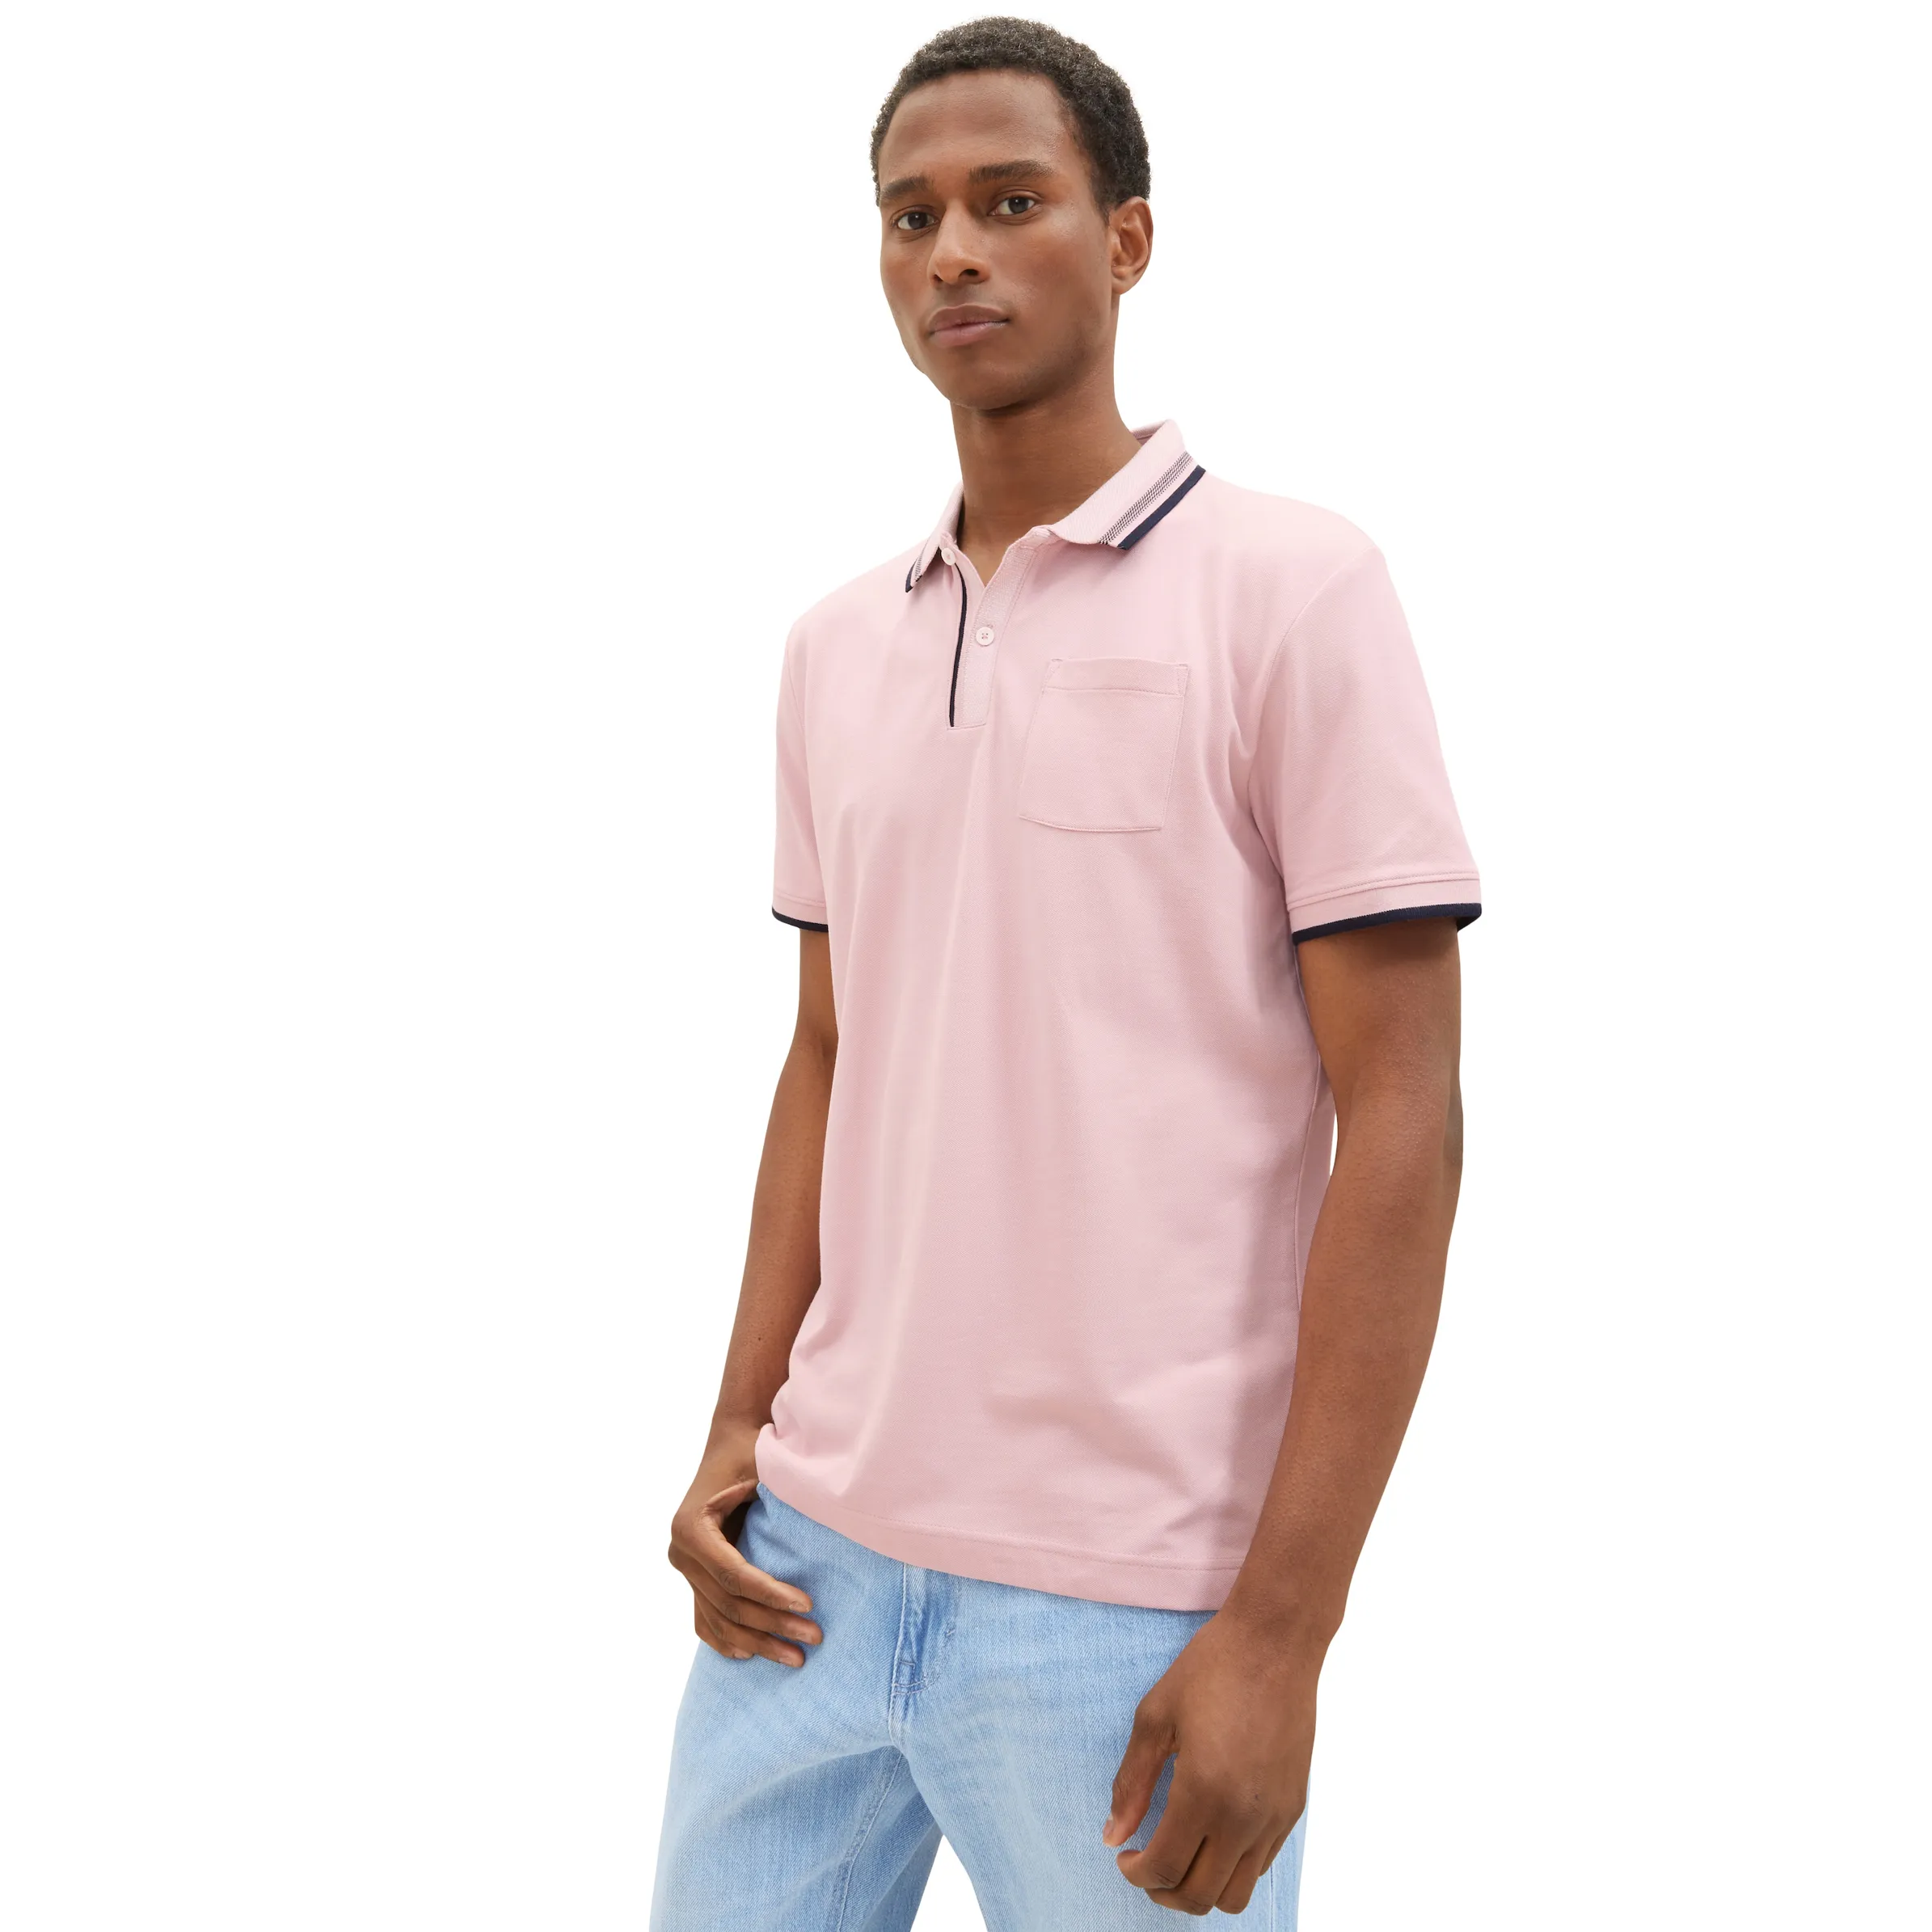 Tom Tailor 1036370 detailed polo Pink 880572 11055 3